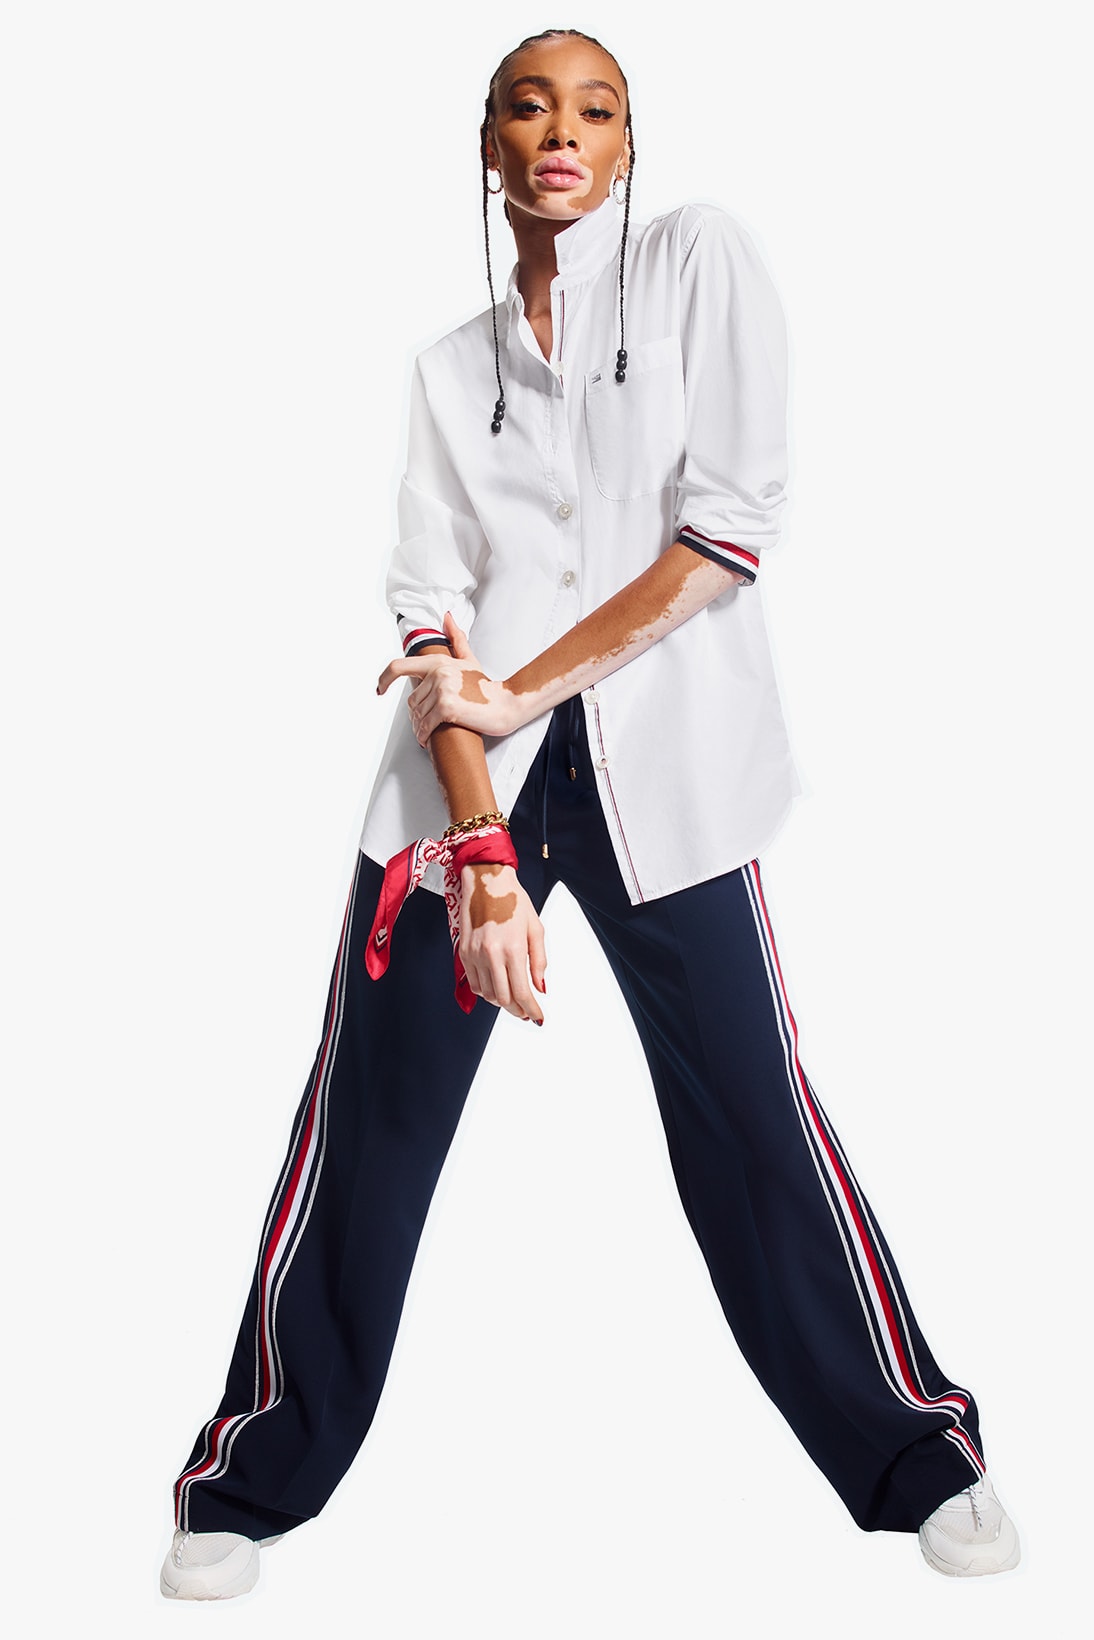 tommy Hilfigger hilfiger icons spring womens collection winnie harlow candice swanepoel campaign red white blue outerwear jackets